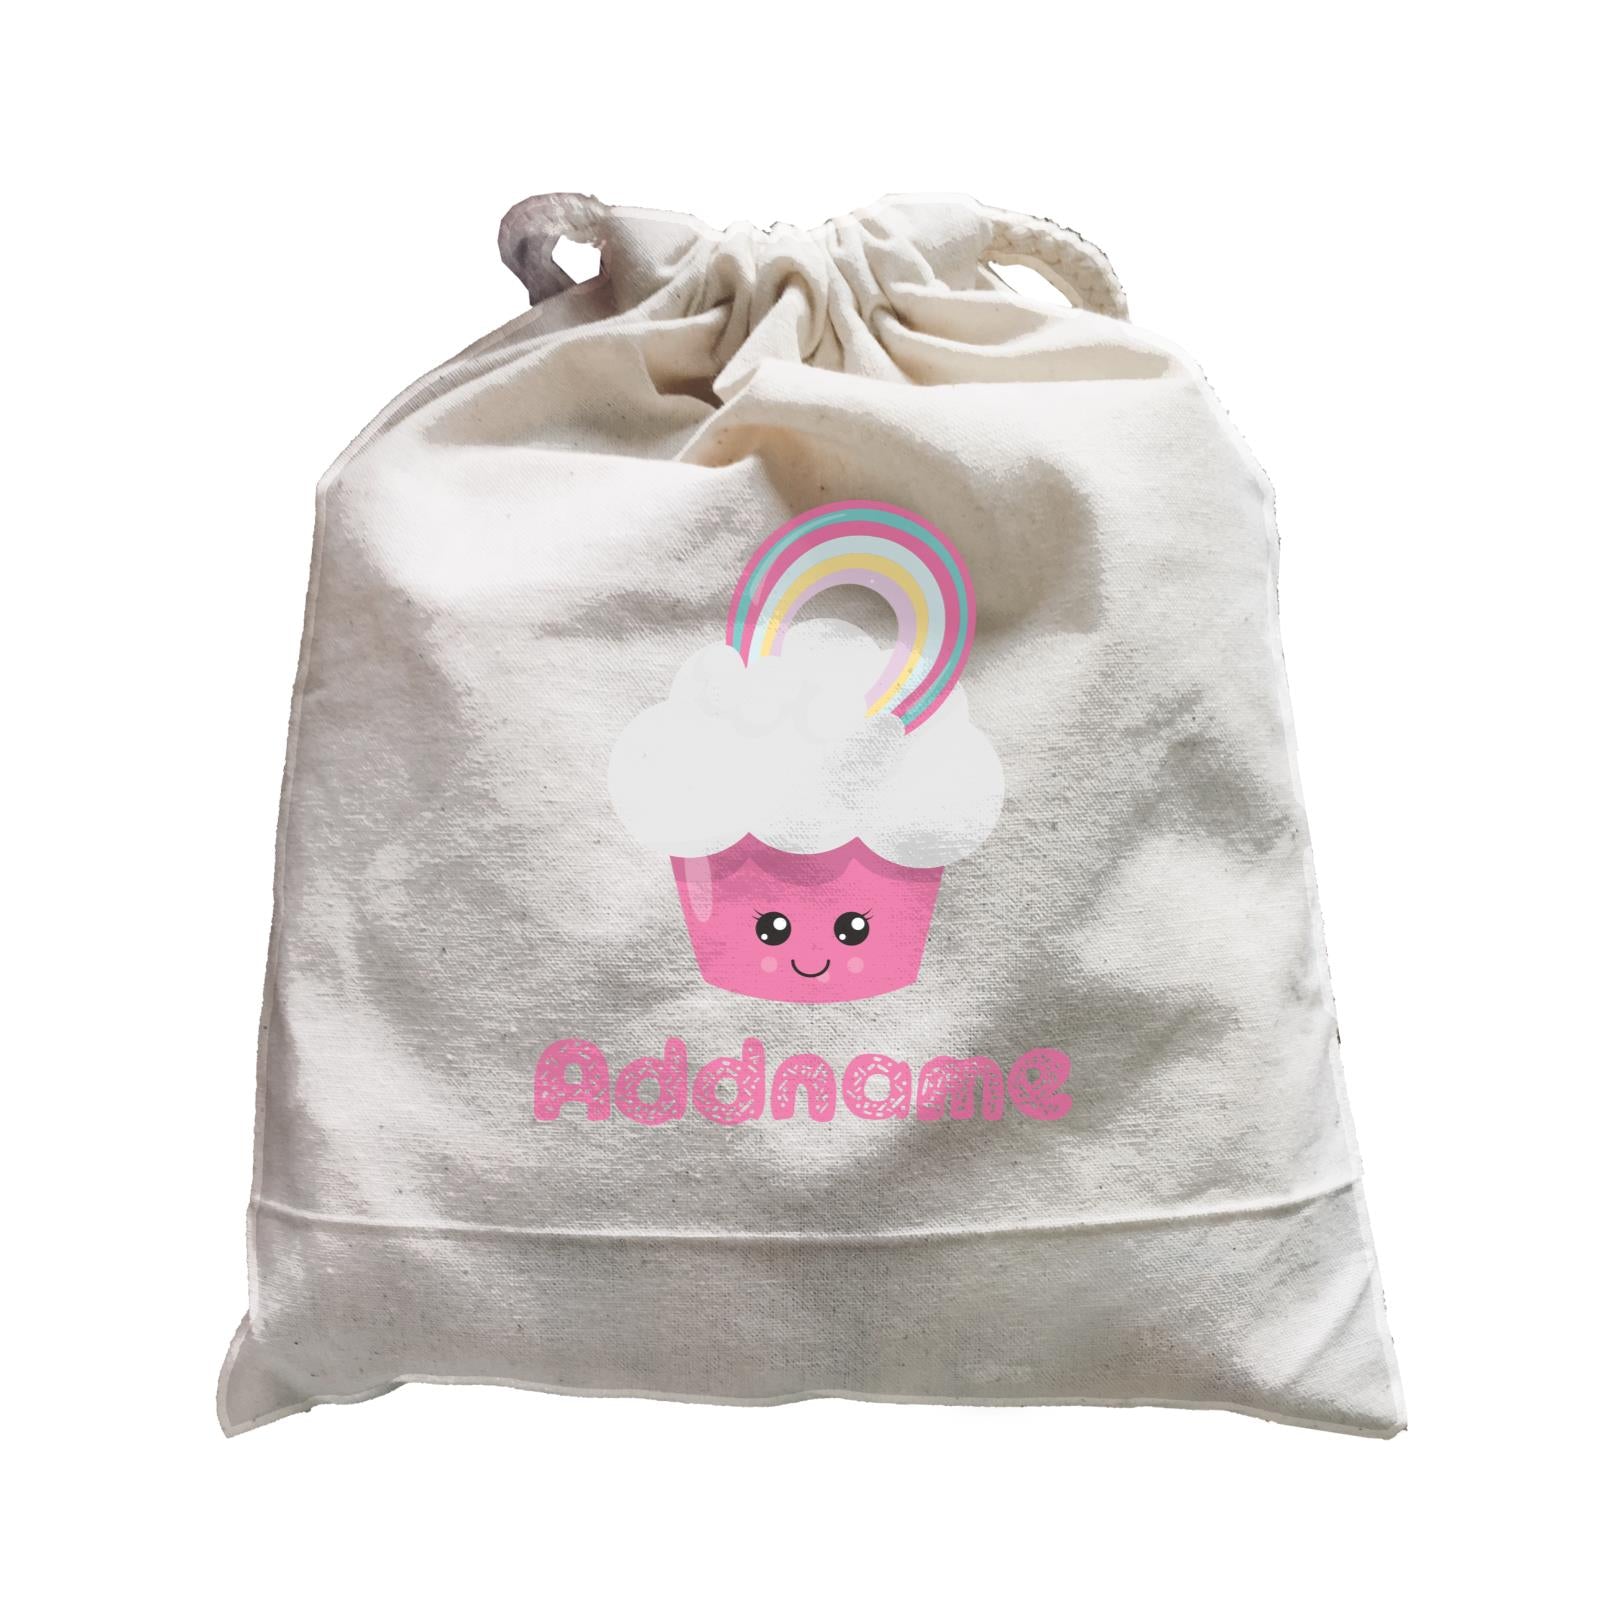 Magical Sweets Pink Cupcake with Rainbow Addname Satchel